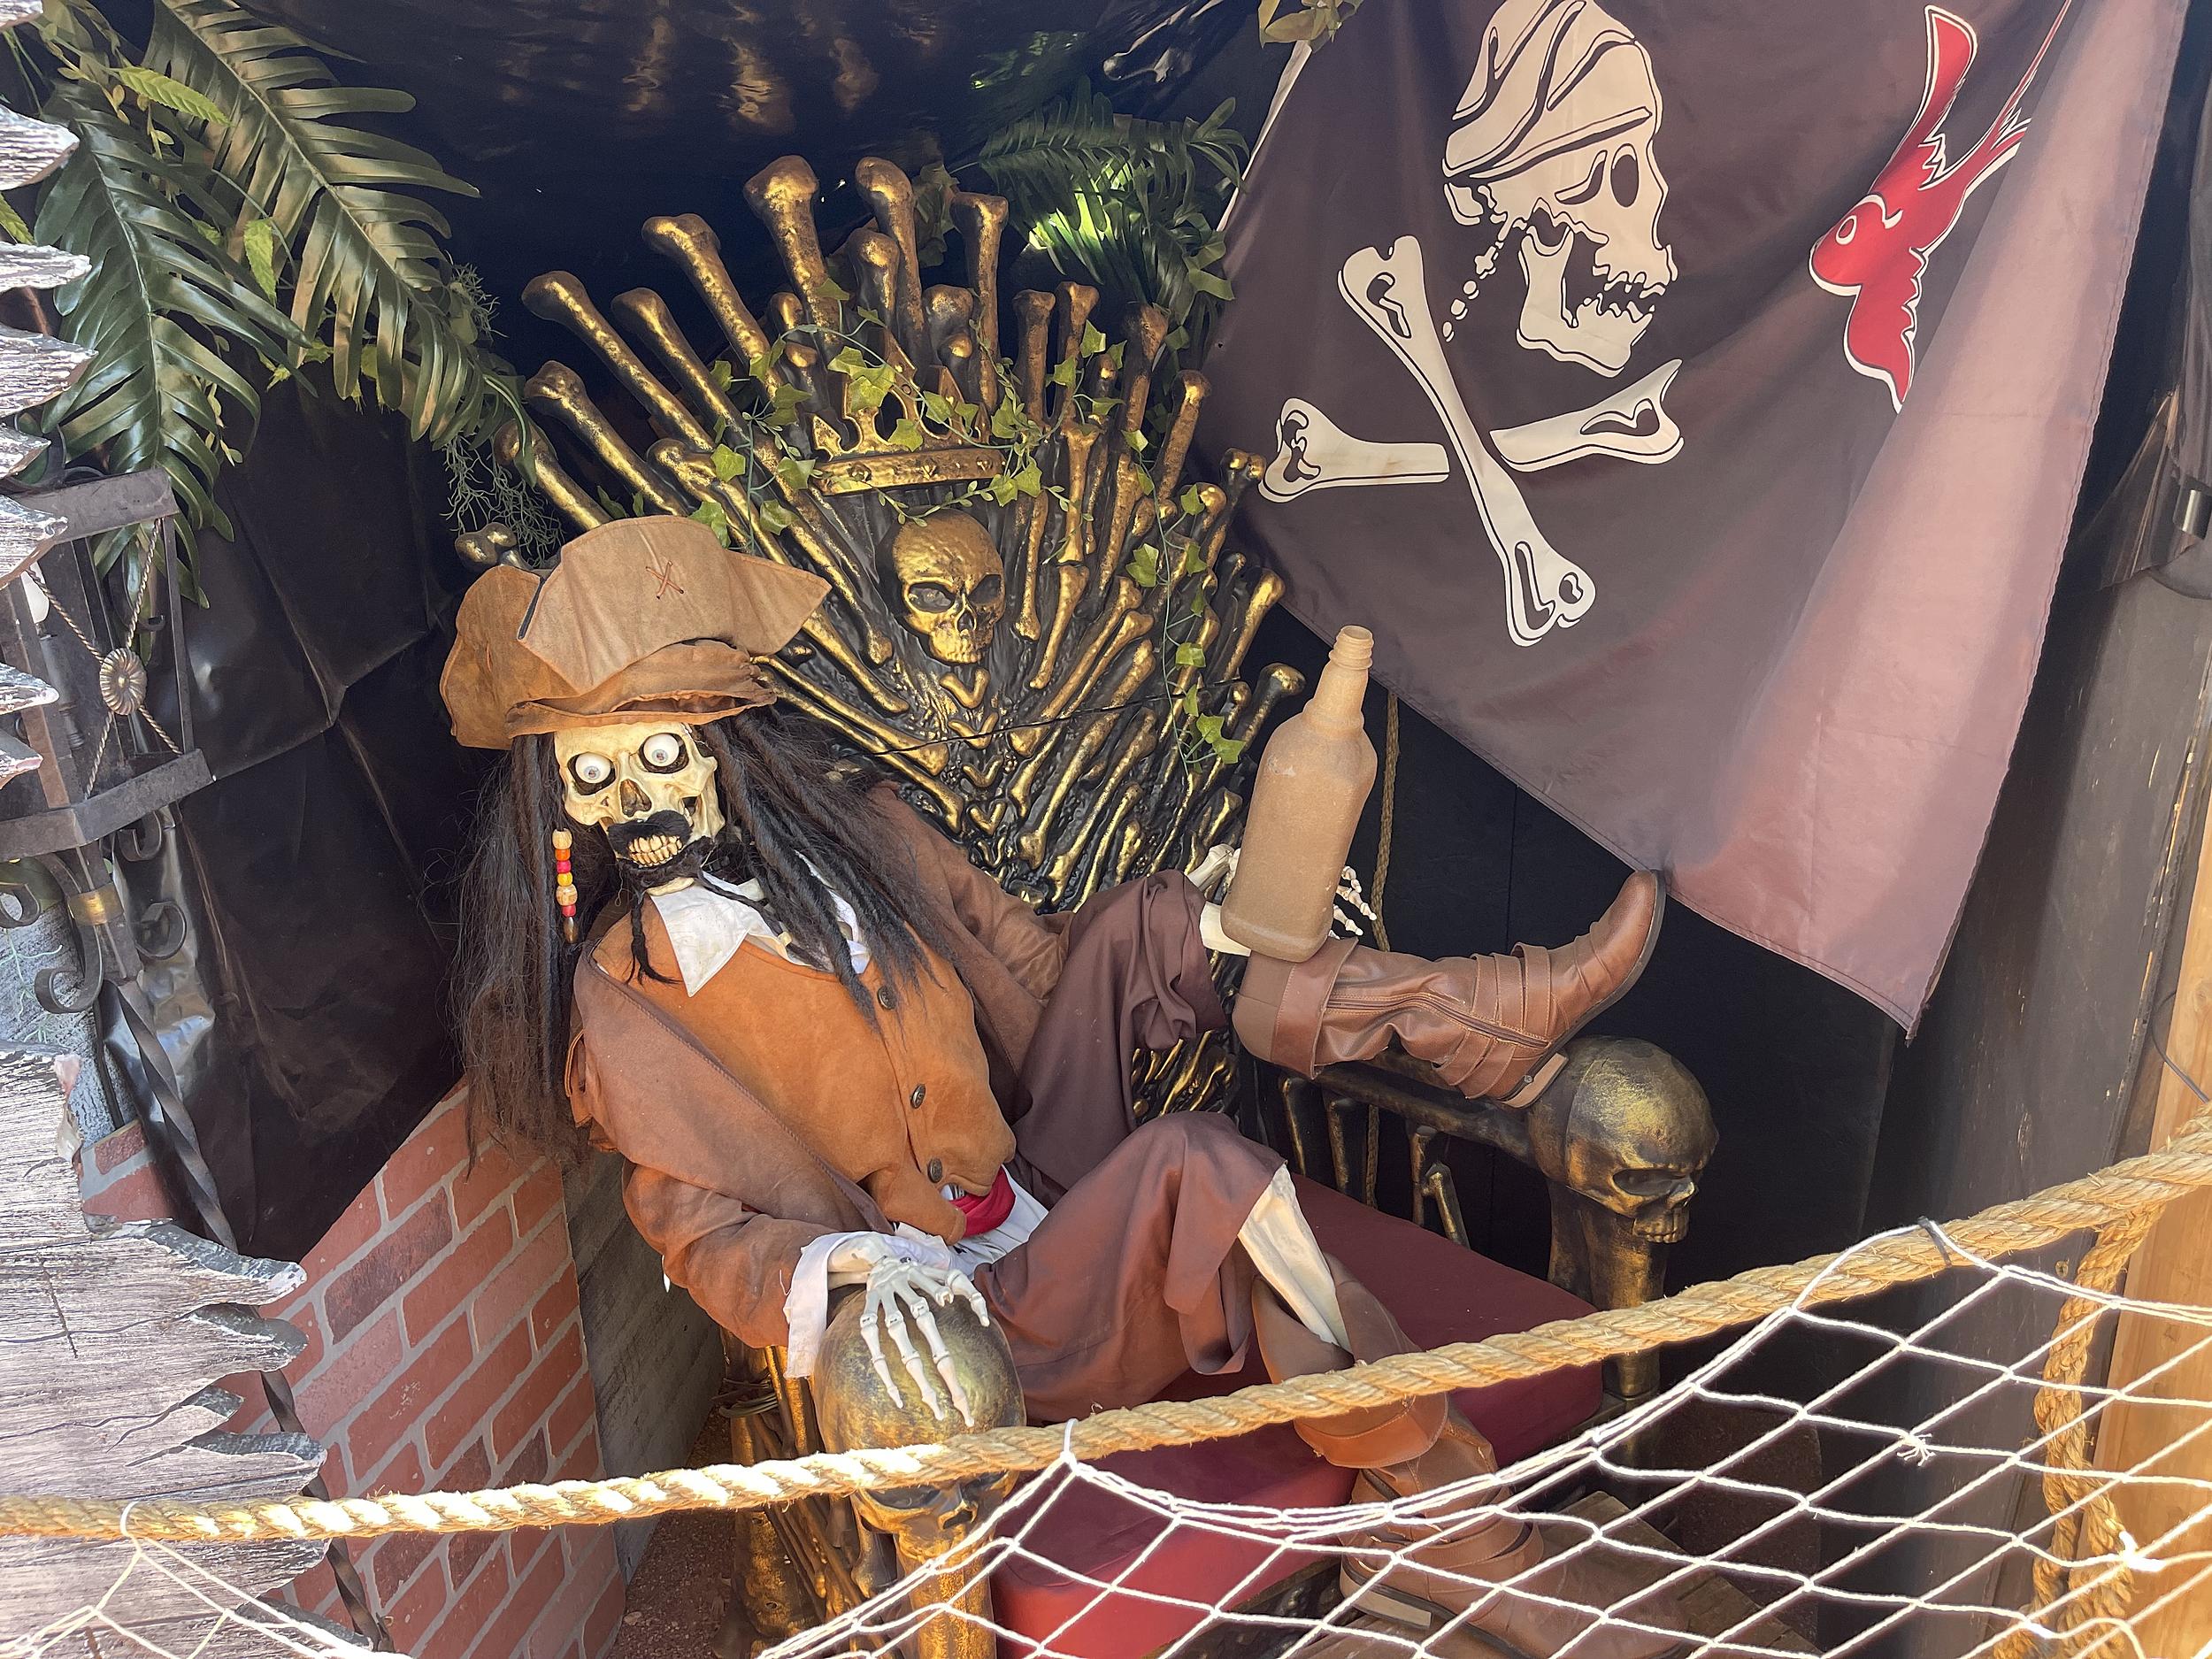 Photos: Inside Pirates of the Caribbean pirate ship in Halloween